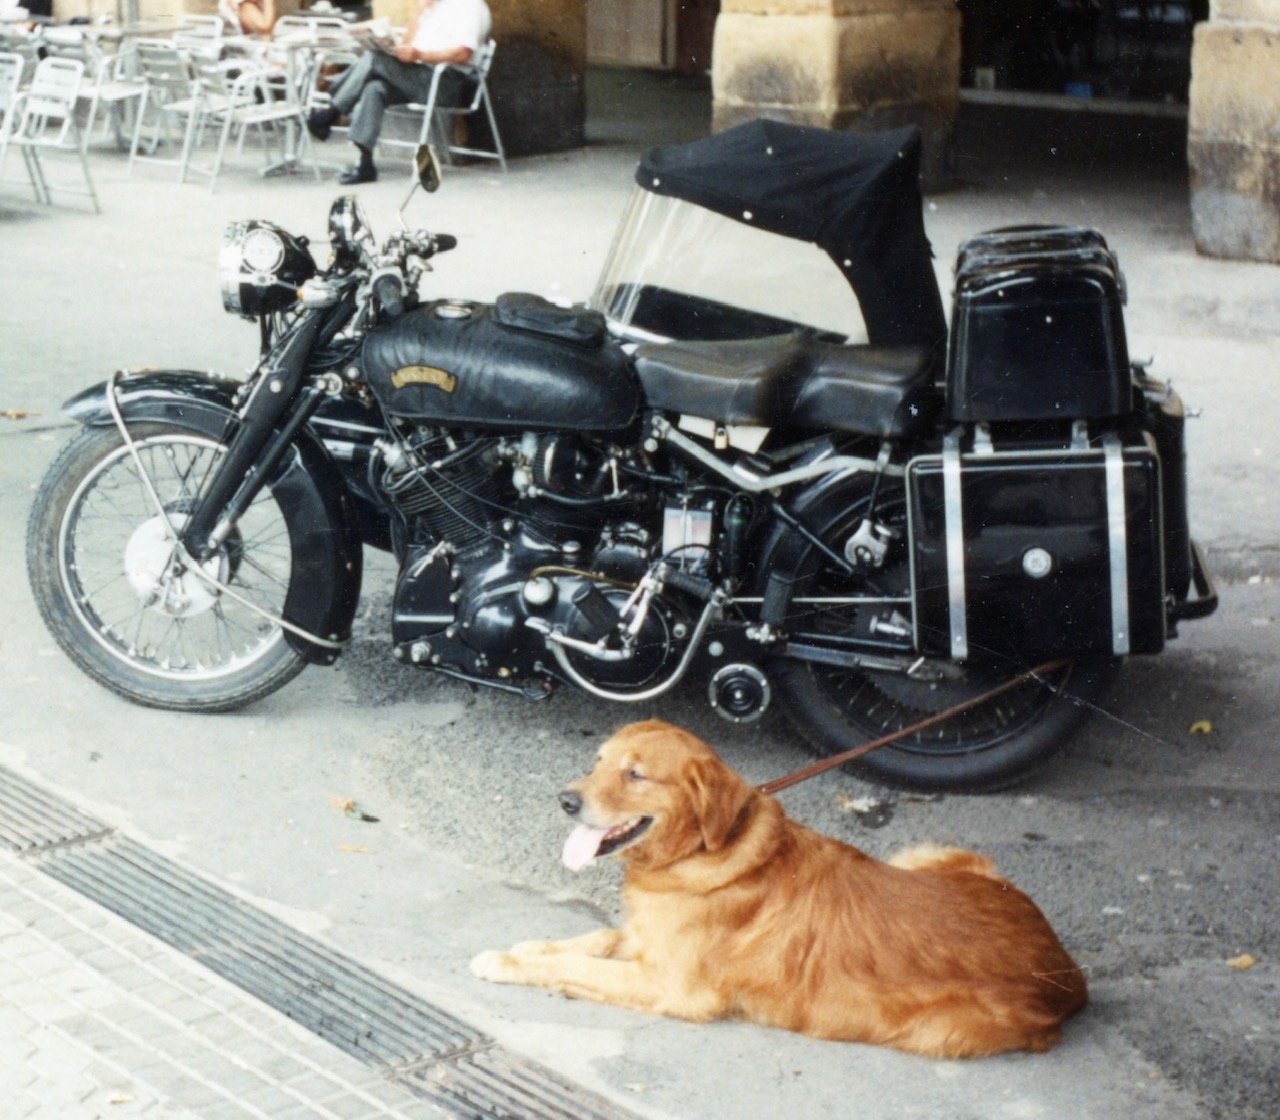 1952 Black Shadow acquired 1969 (for £160).jpeg - Bill W's 1952 Black Shadow - acquired 1969 for £160.  The sidecar was fitted in 1980 - great for dogs, and for camping.